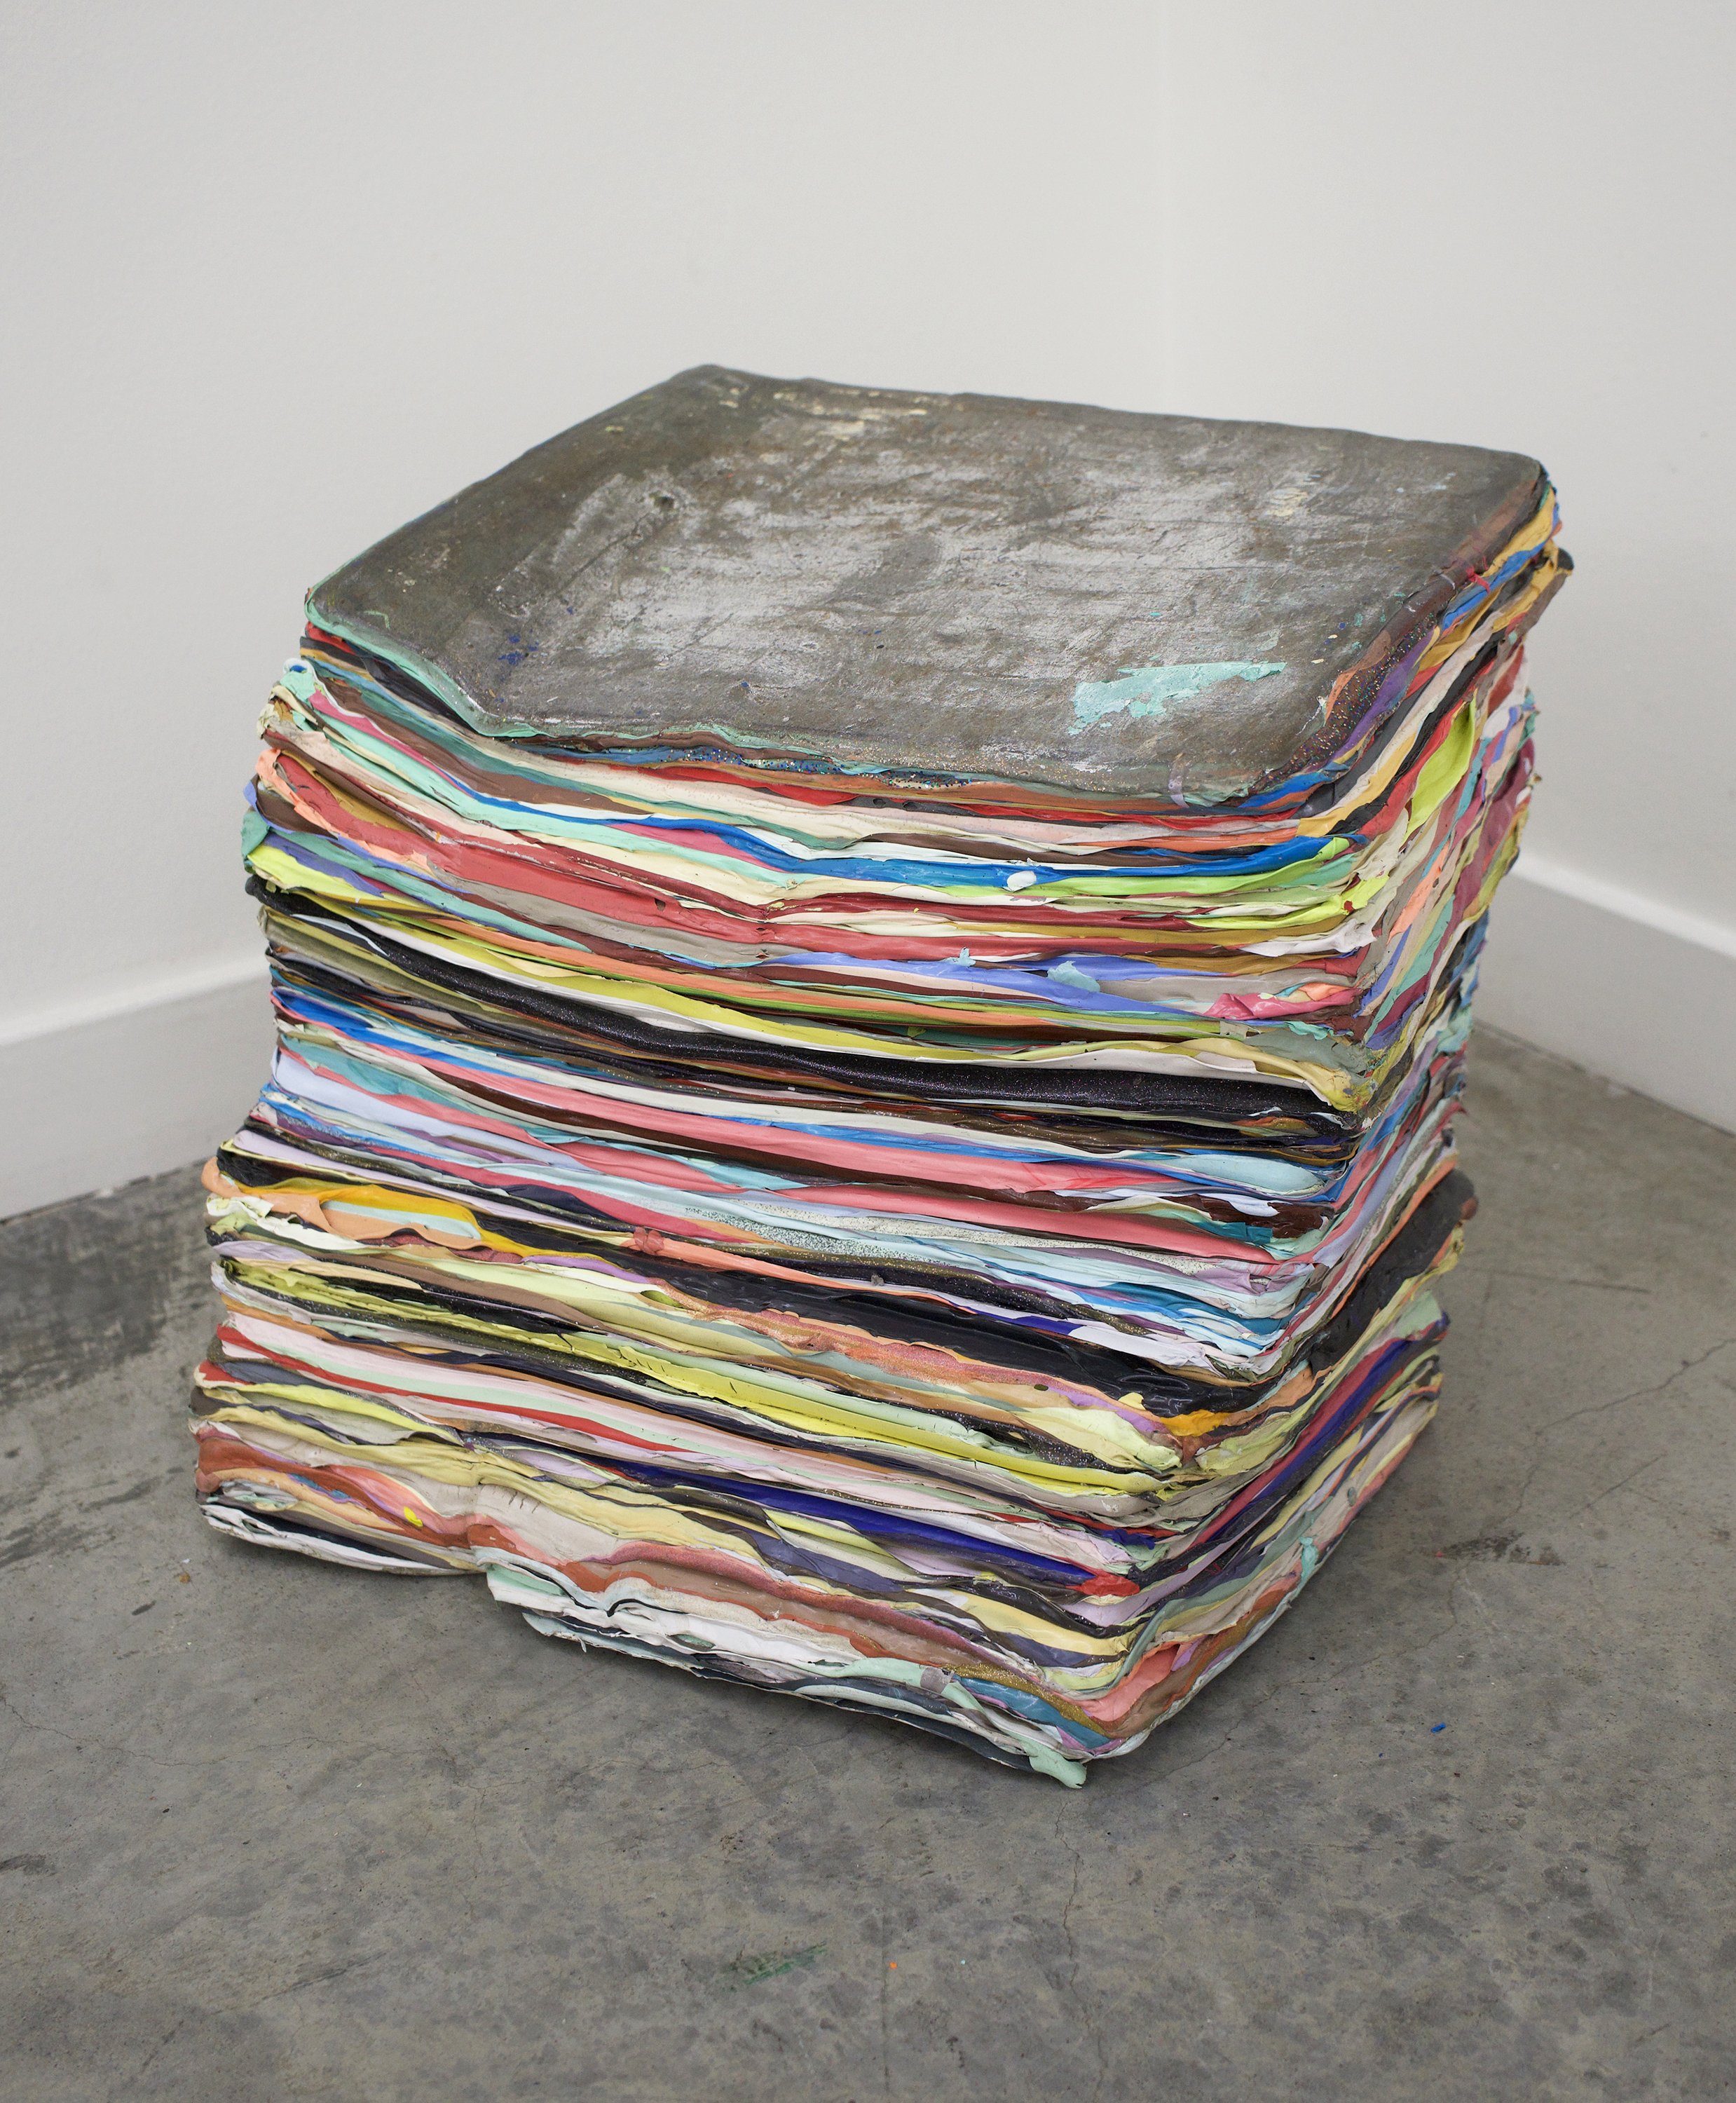  Leah Rosenberg  Paint Stack (resting state) , 2008   acrylic with medium 14" x 14" x 15" 